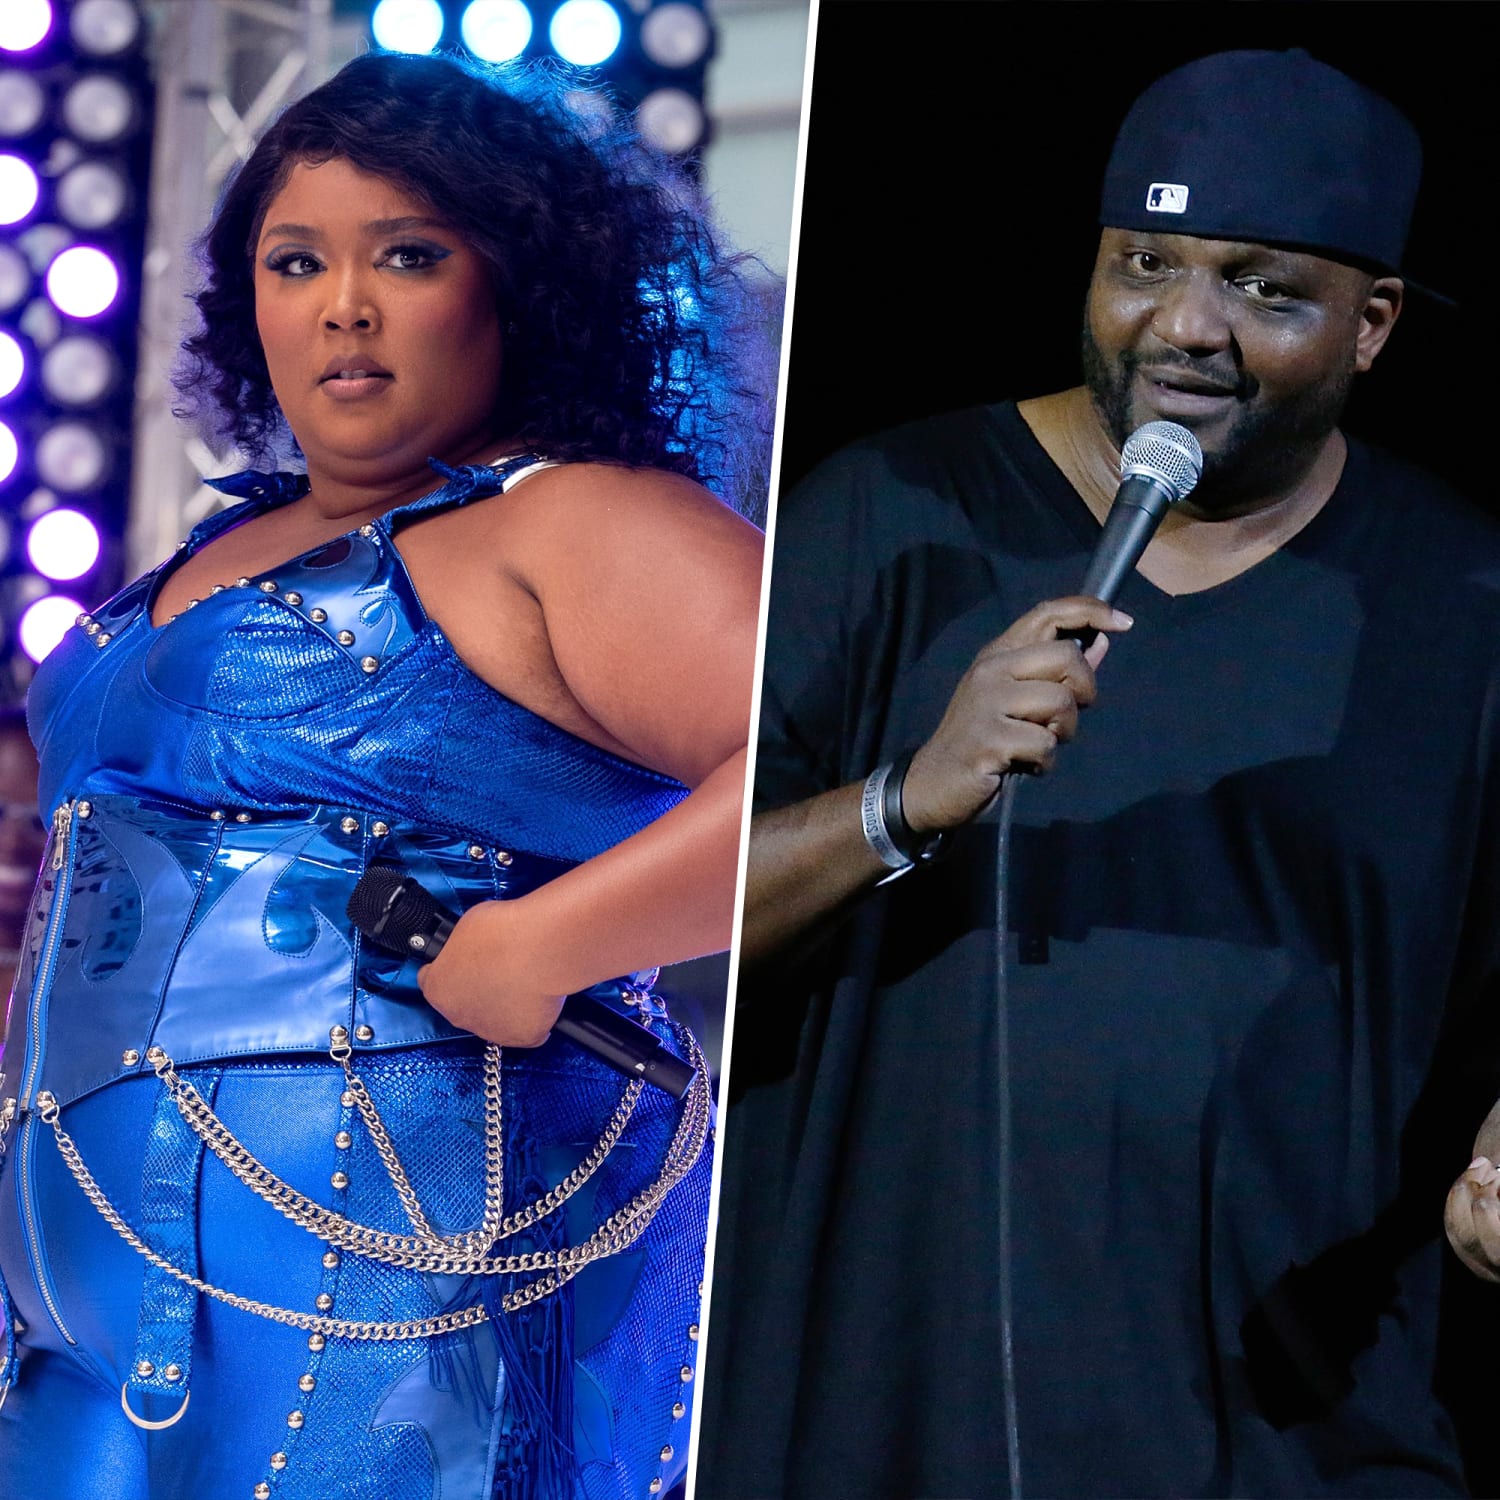 Aries Spears' attack on Lizzo is body-shaming, fat phobia at its most  hypocritical